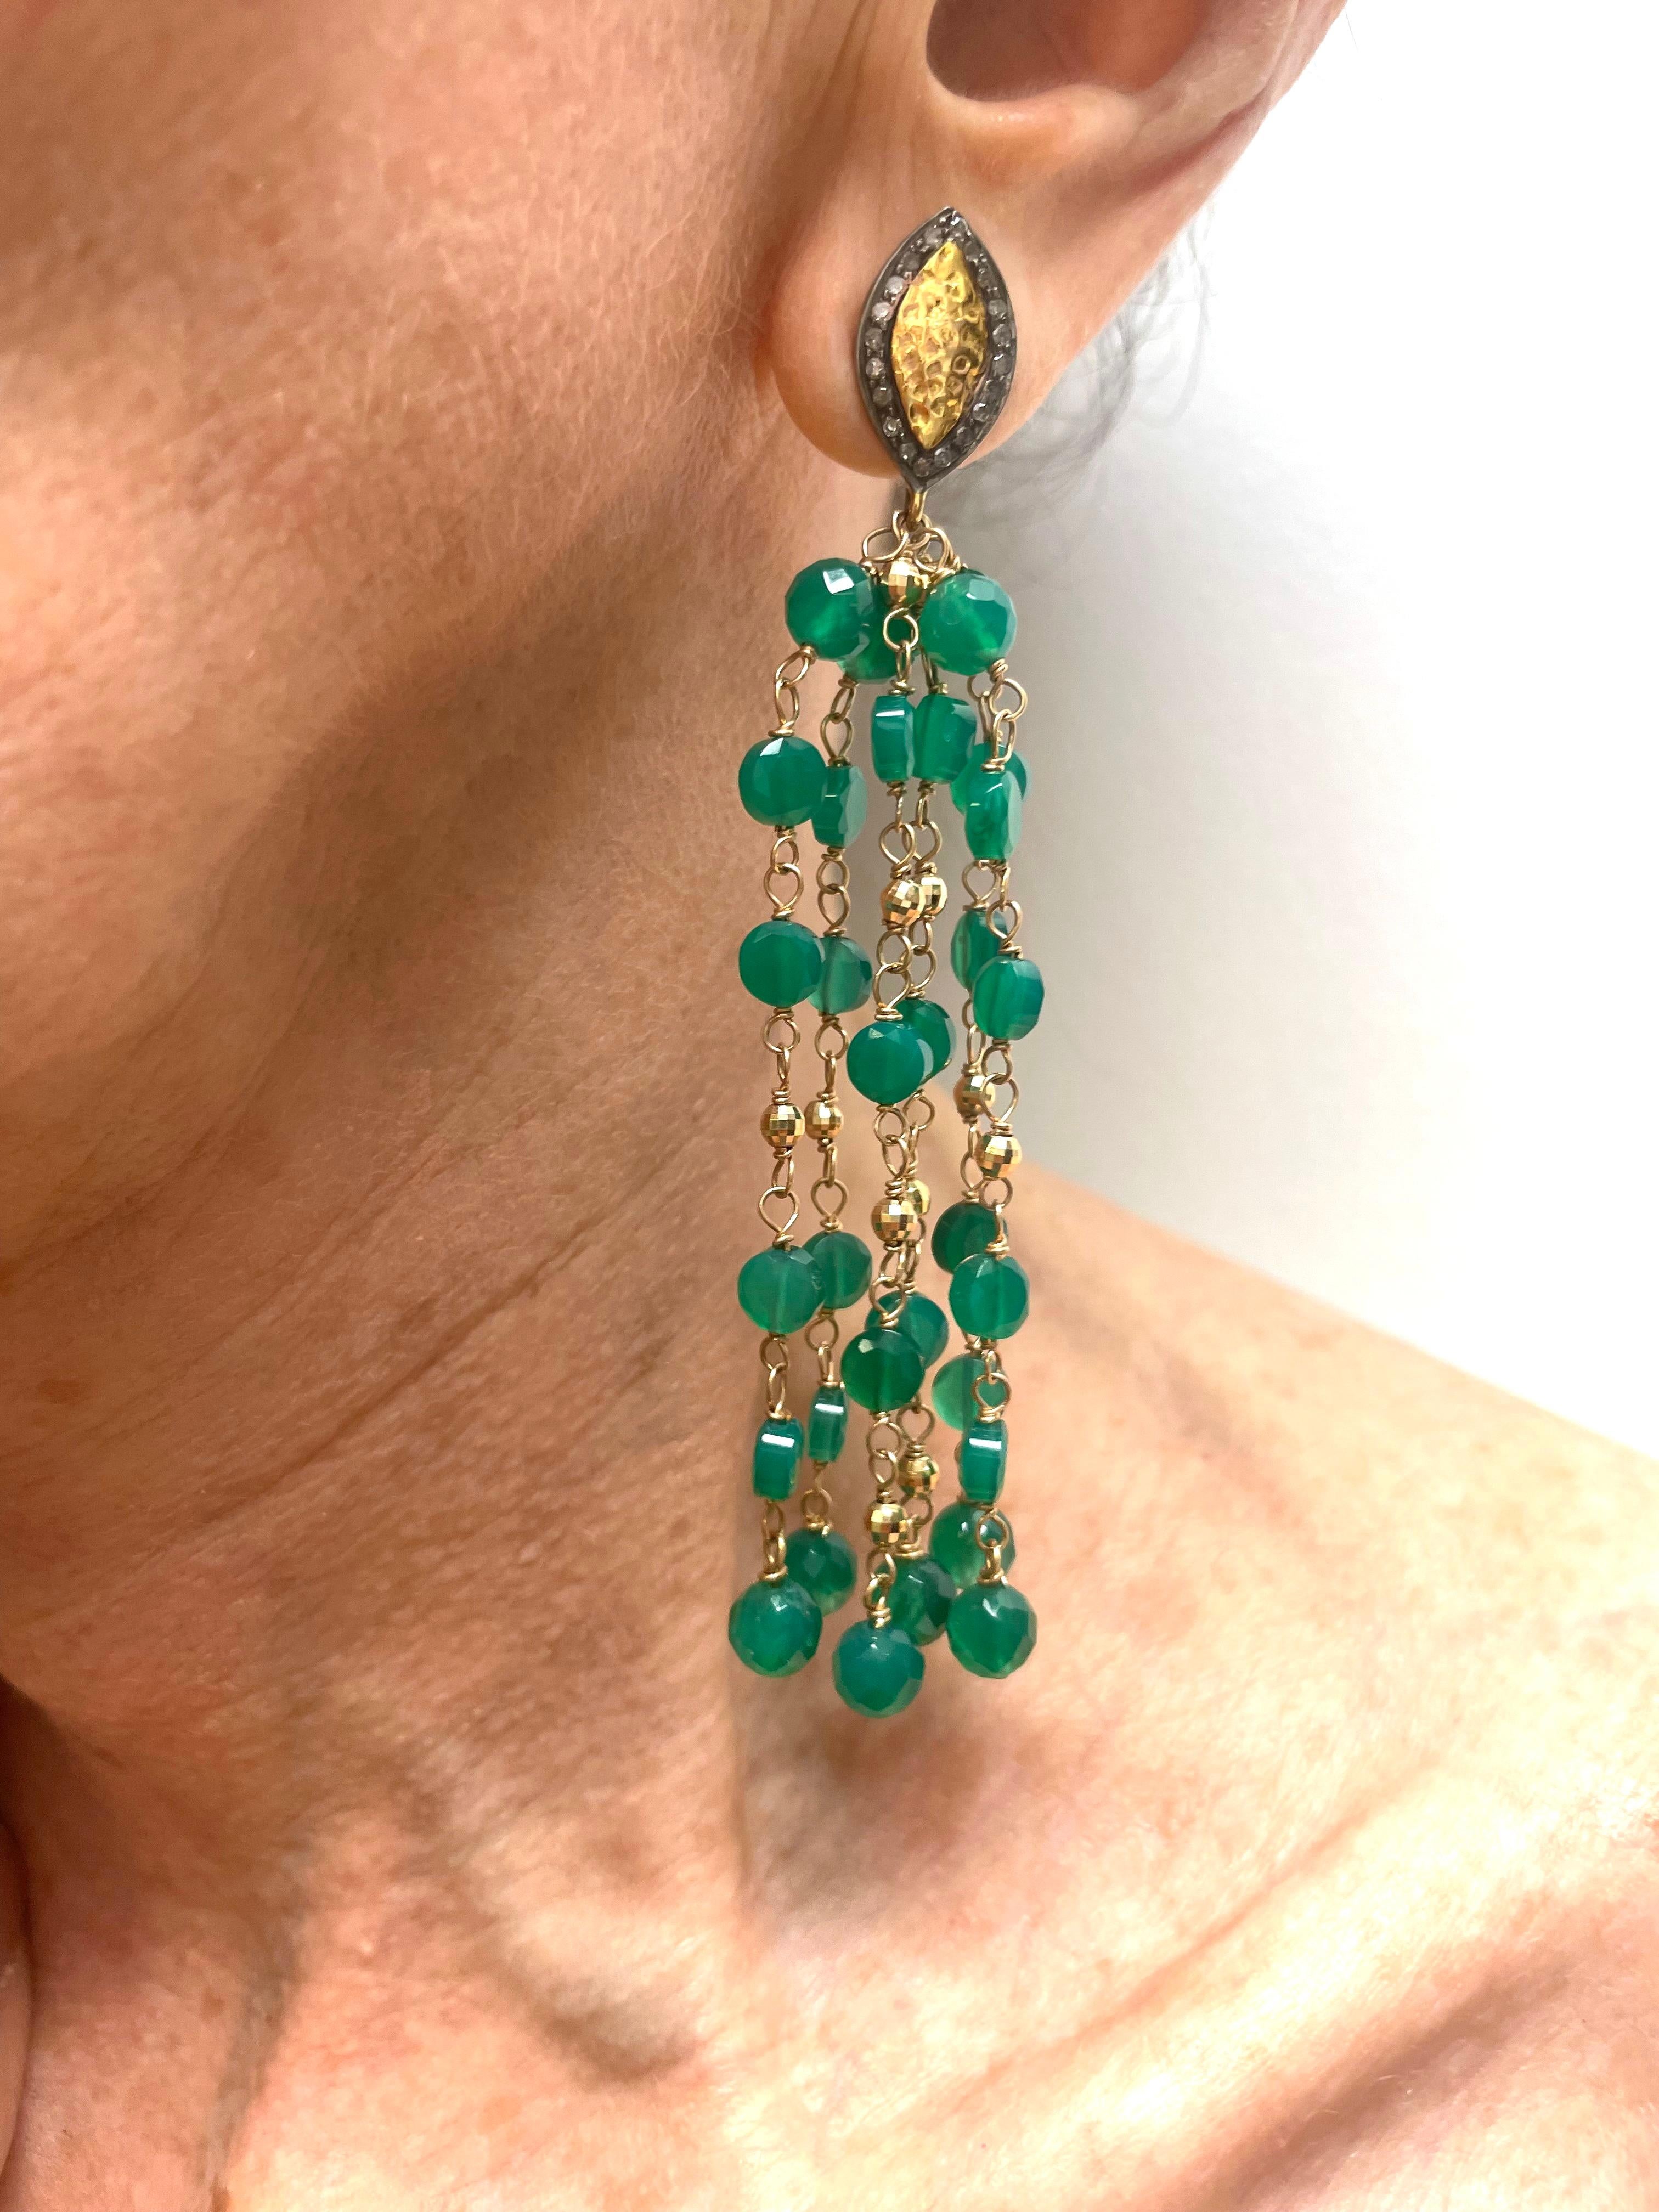 Description
Festive and fun, full of movement and sparkle, just what’s needed to put a smile on your face and holiday festivities. Vivid green faceted onyx delicately and meticulously hand wire-wrapped dangle to perfection with accented faceted 14k